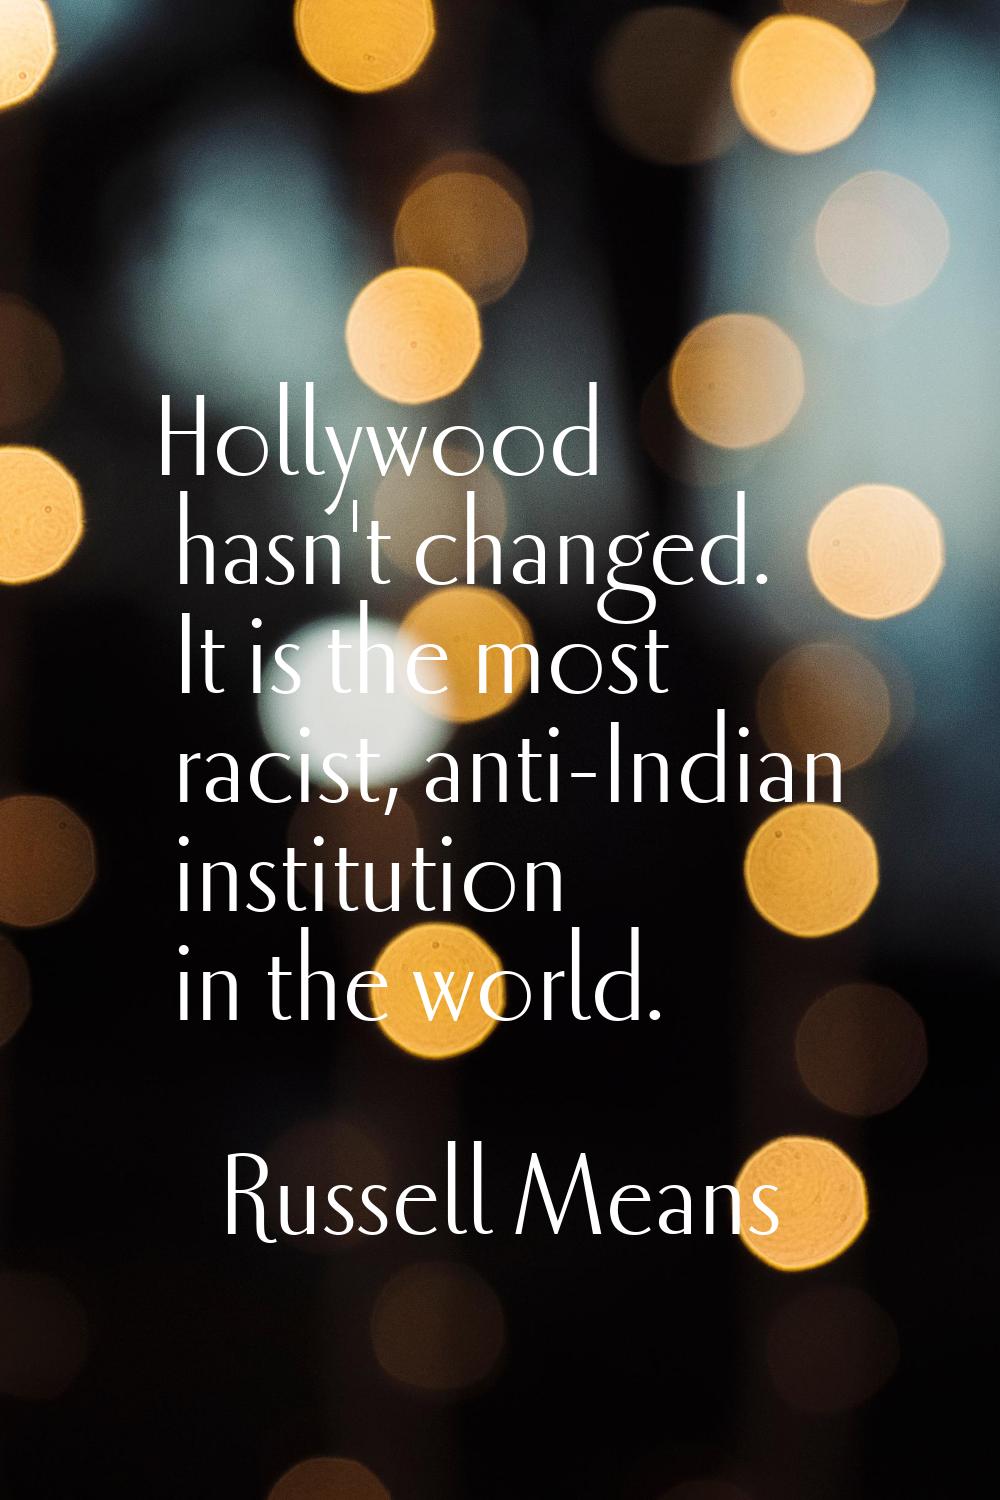 Hollywood hasn't changed. It is the most racist, anti-Indian institution in the world.